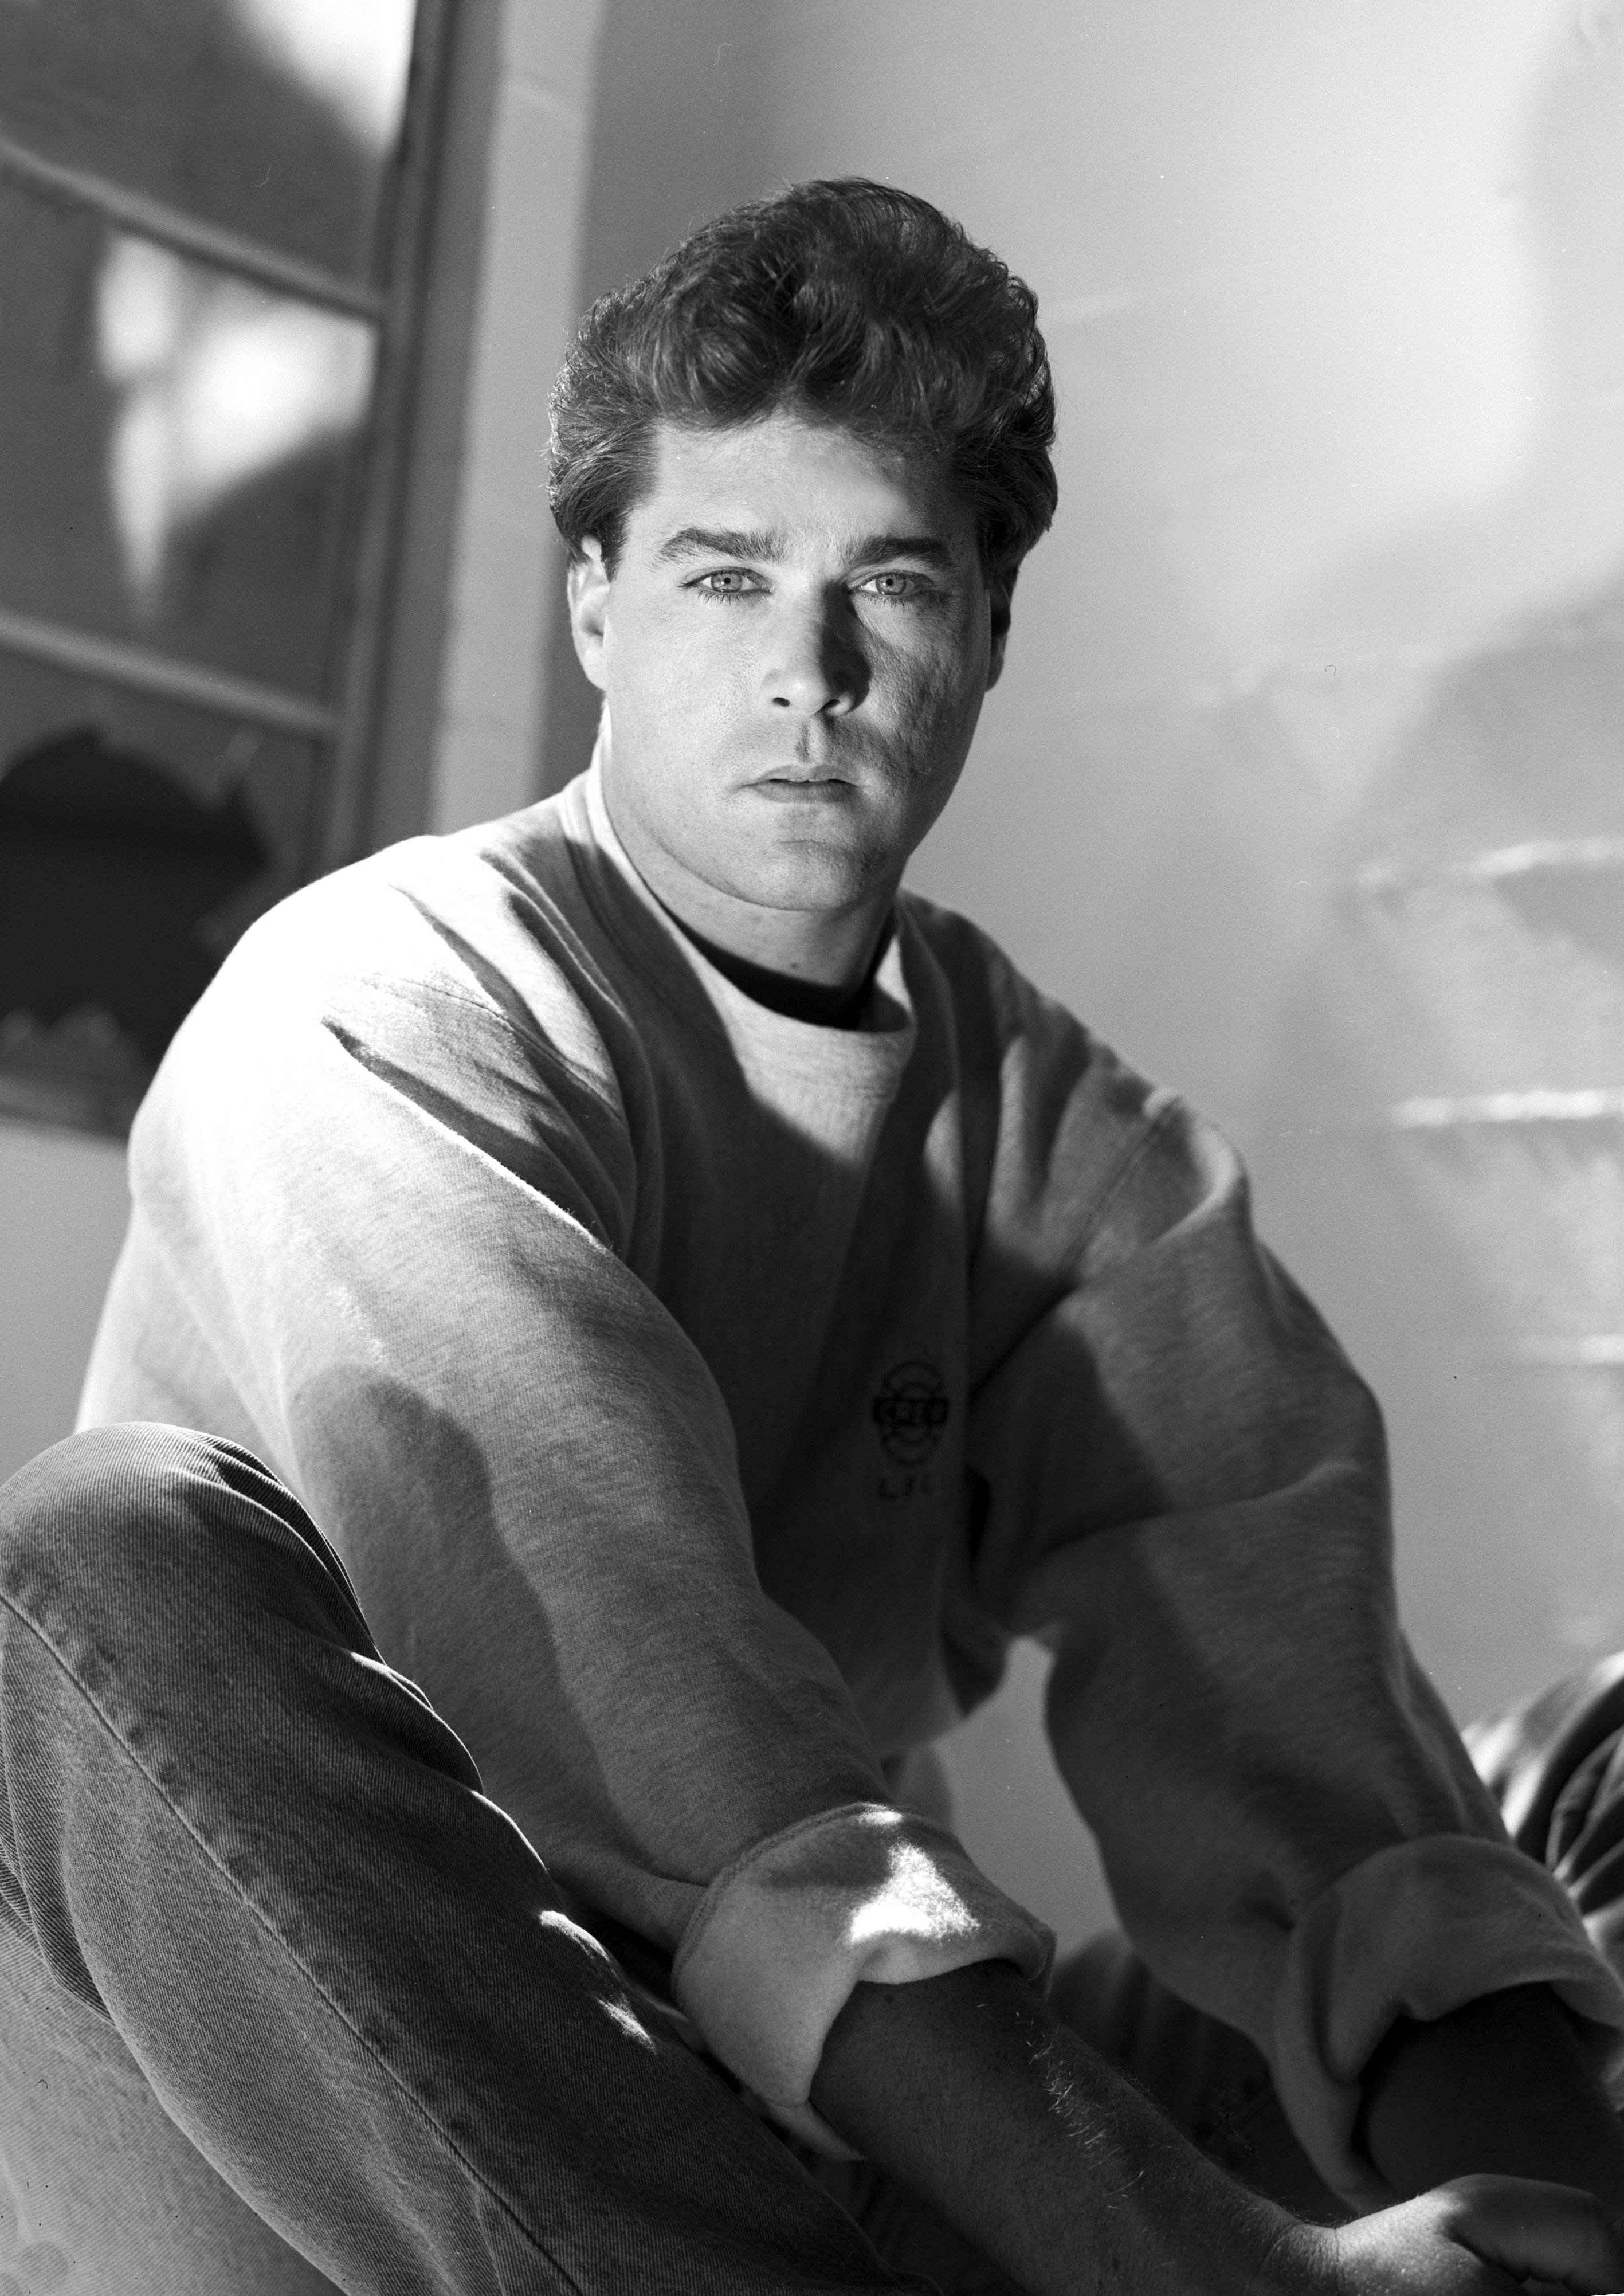 Ray Liotta poses for a portrait in October 1990, in Los Angeles, California. | Source: Aaron Rapoport/Corbis/Getty Images